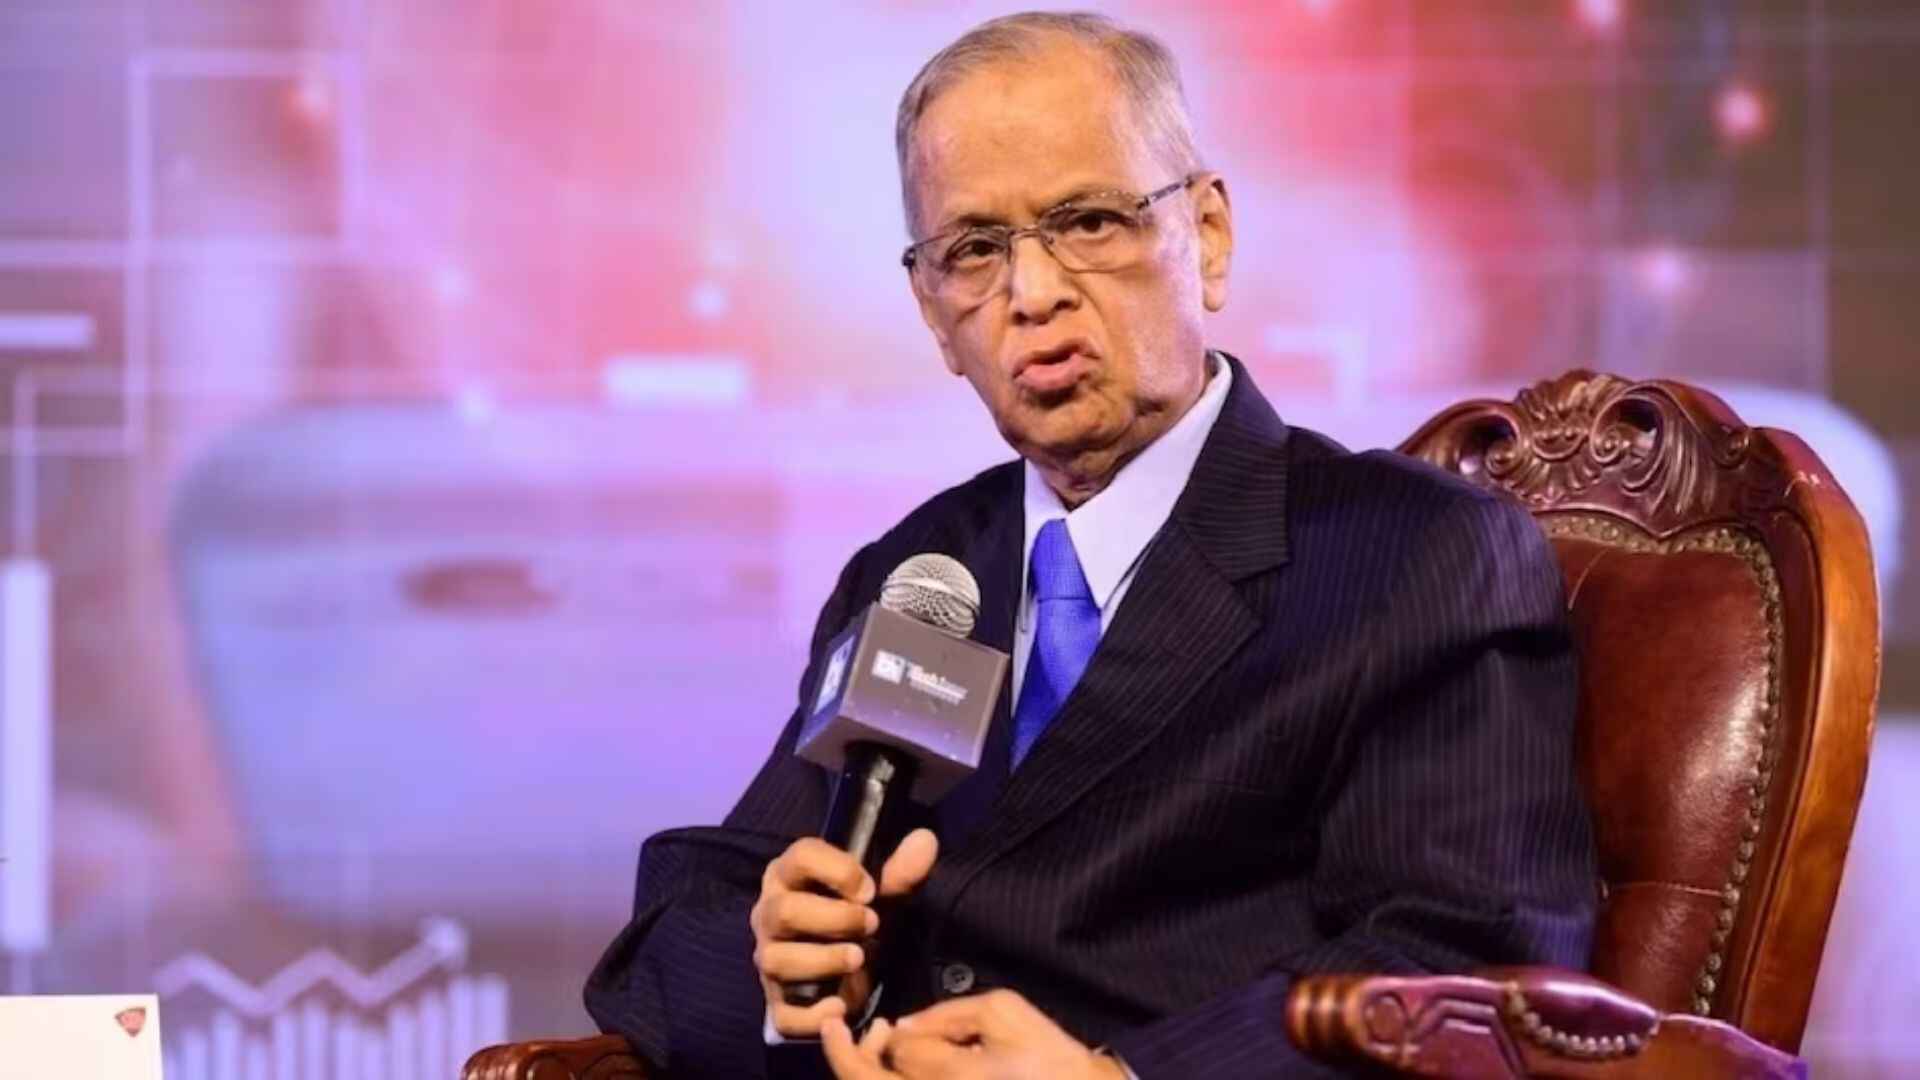 Entrepreneurship is a state of mind: Infosys co-founder NR Narayana Murthy